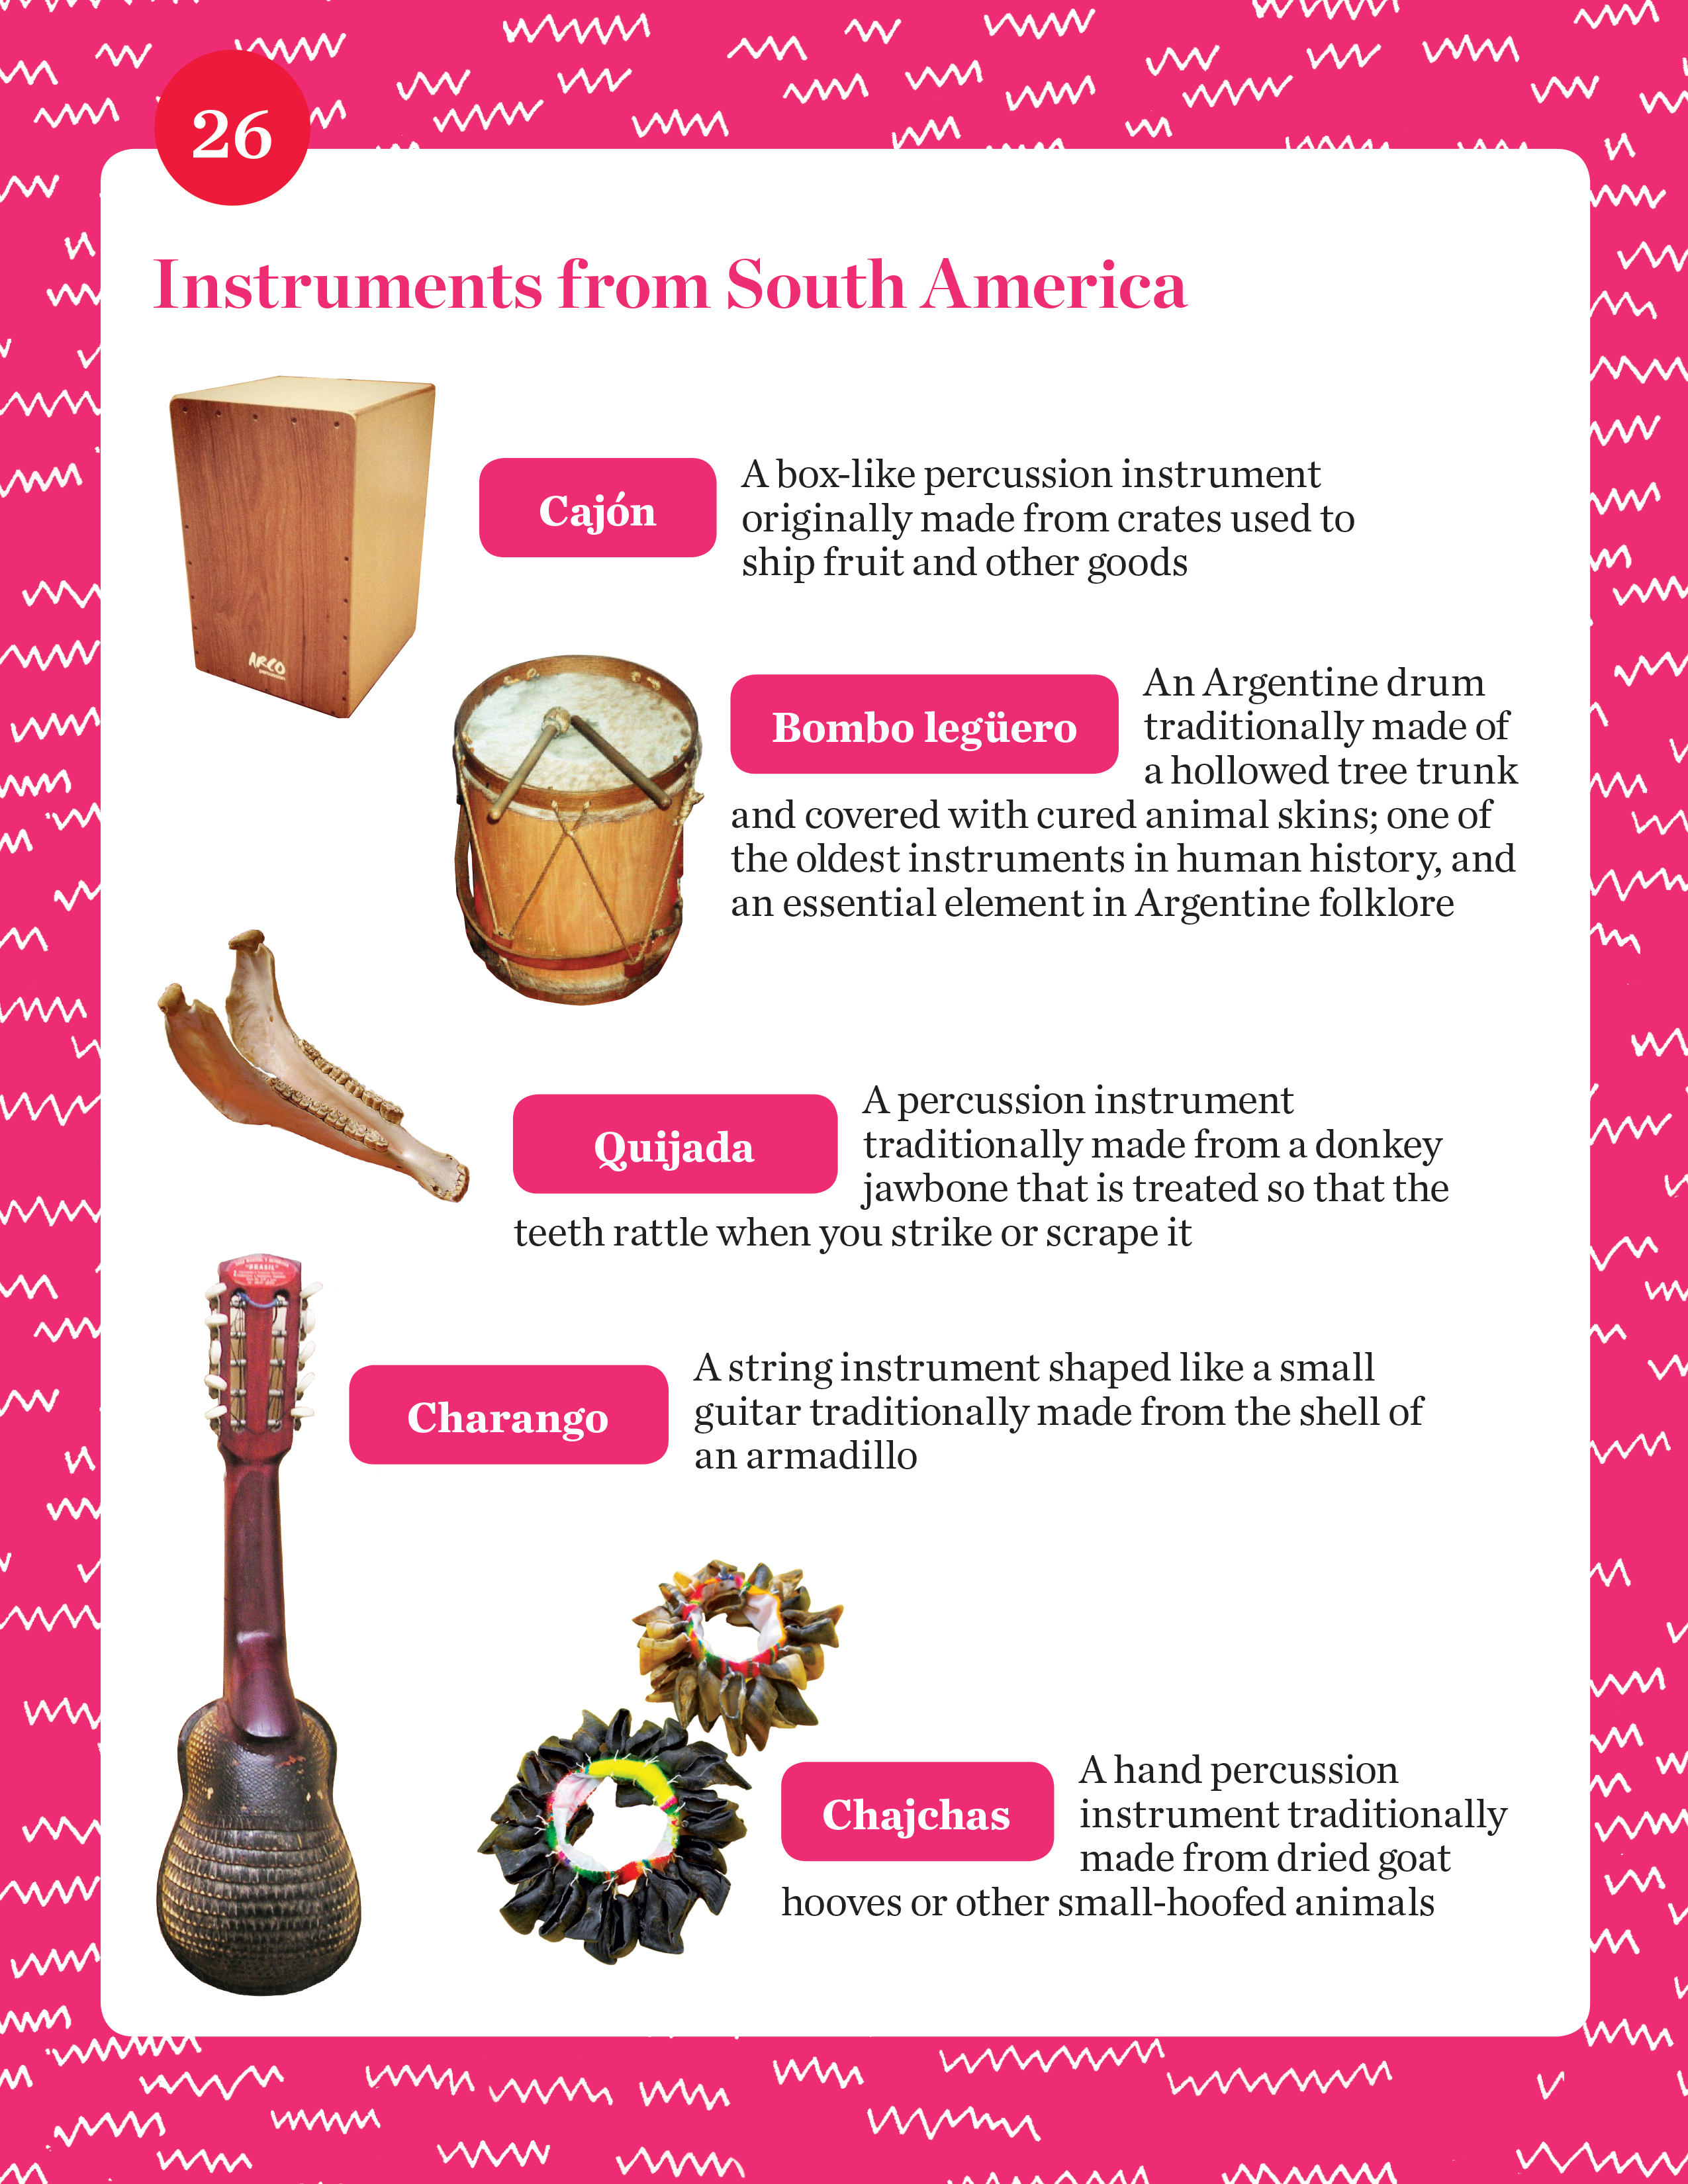 Instruments from South America